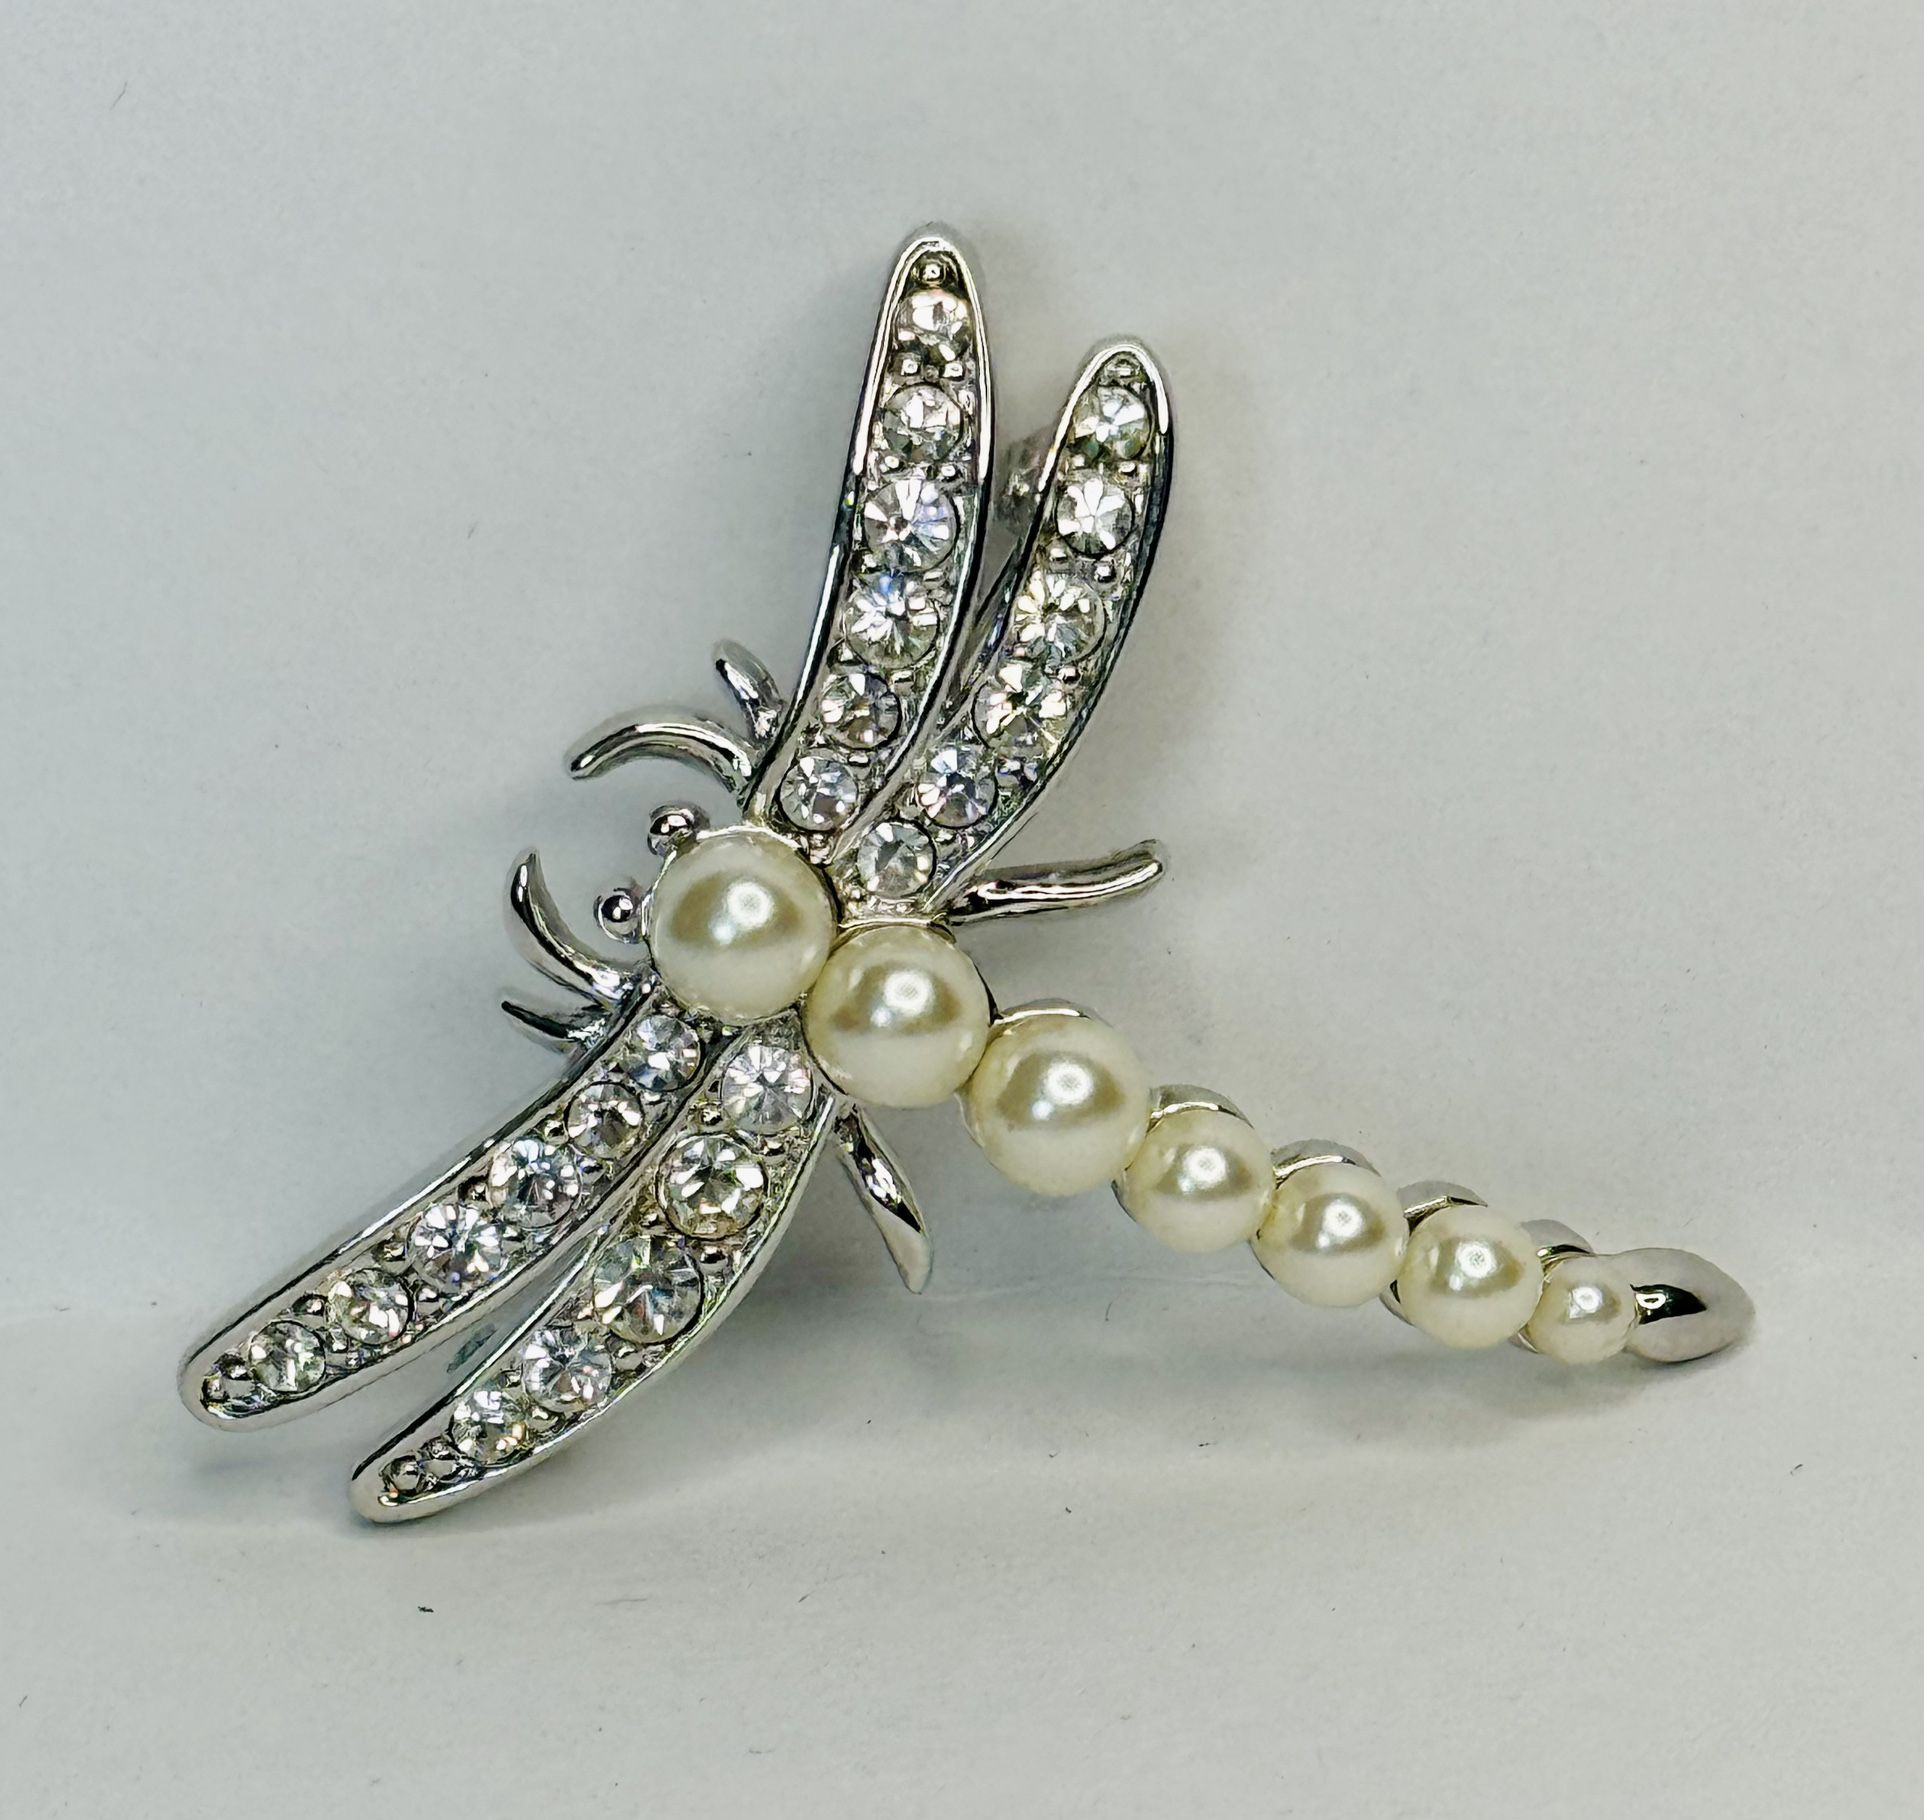 Signed Napier Brooch Pin Dragonfly Silver Tone Faux Pearls Rhinestones Estate